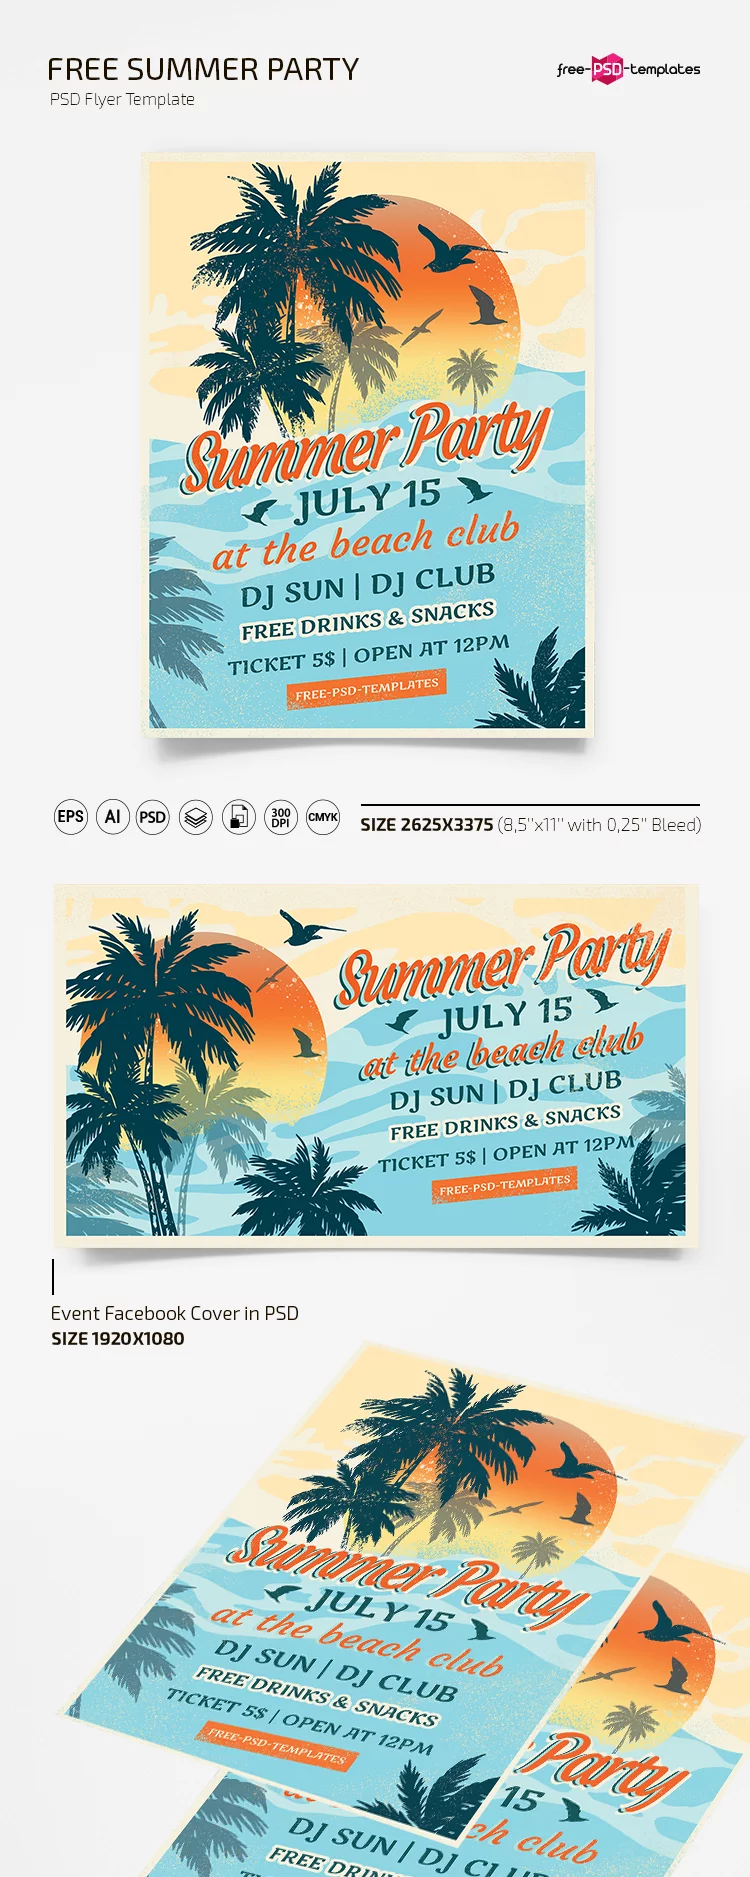 Free Summer Party Flyer Template in PSD + AI